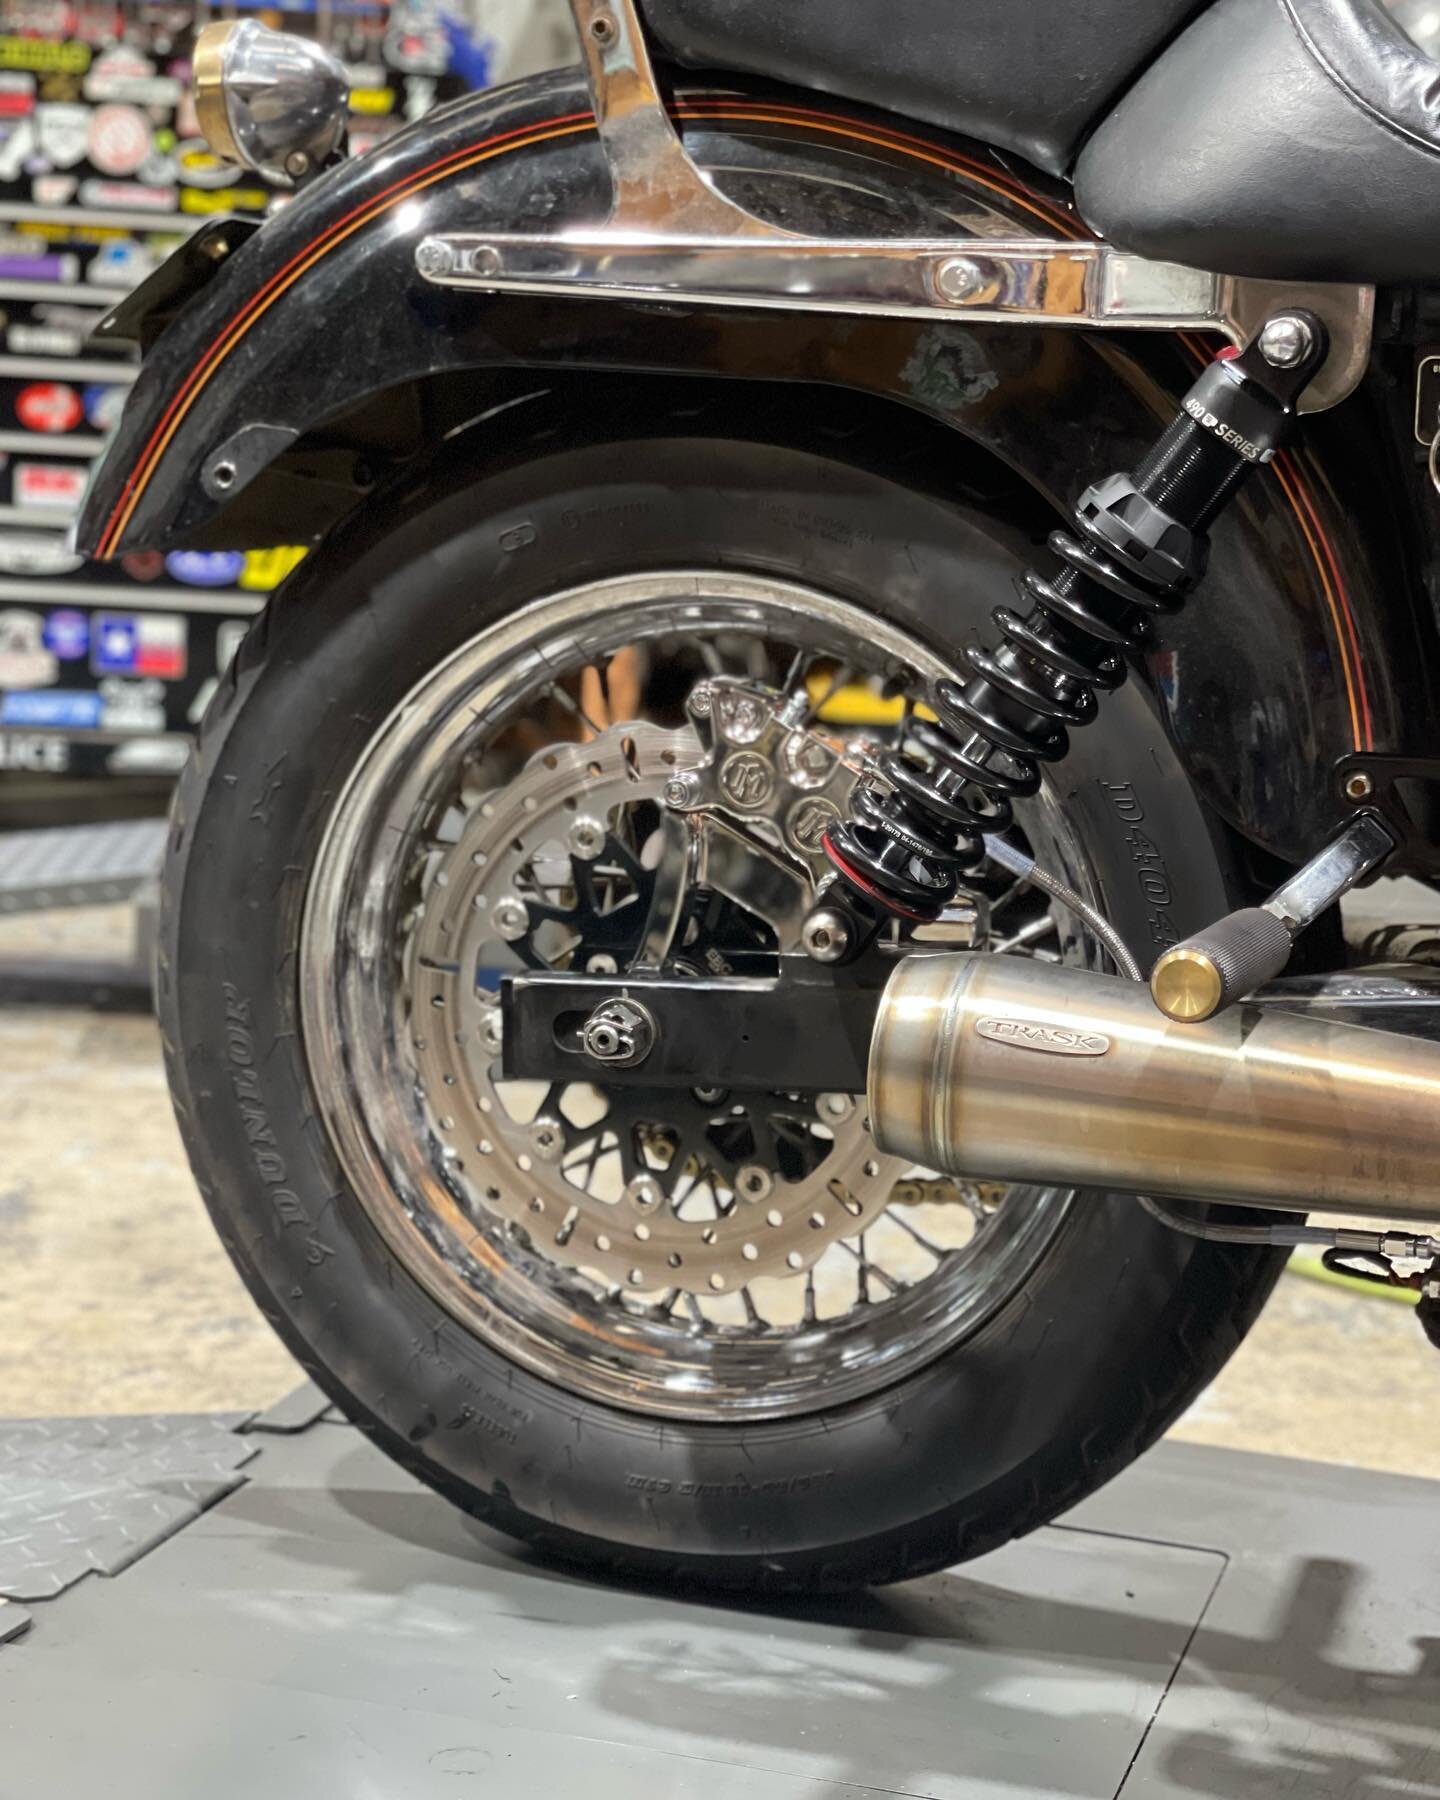 Don&rsquo;t underestimate the difference upgrading your suspension and brakes can make. Come see us if you want your bike to handle and stop light years better than the factory.